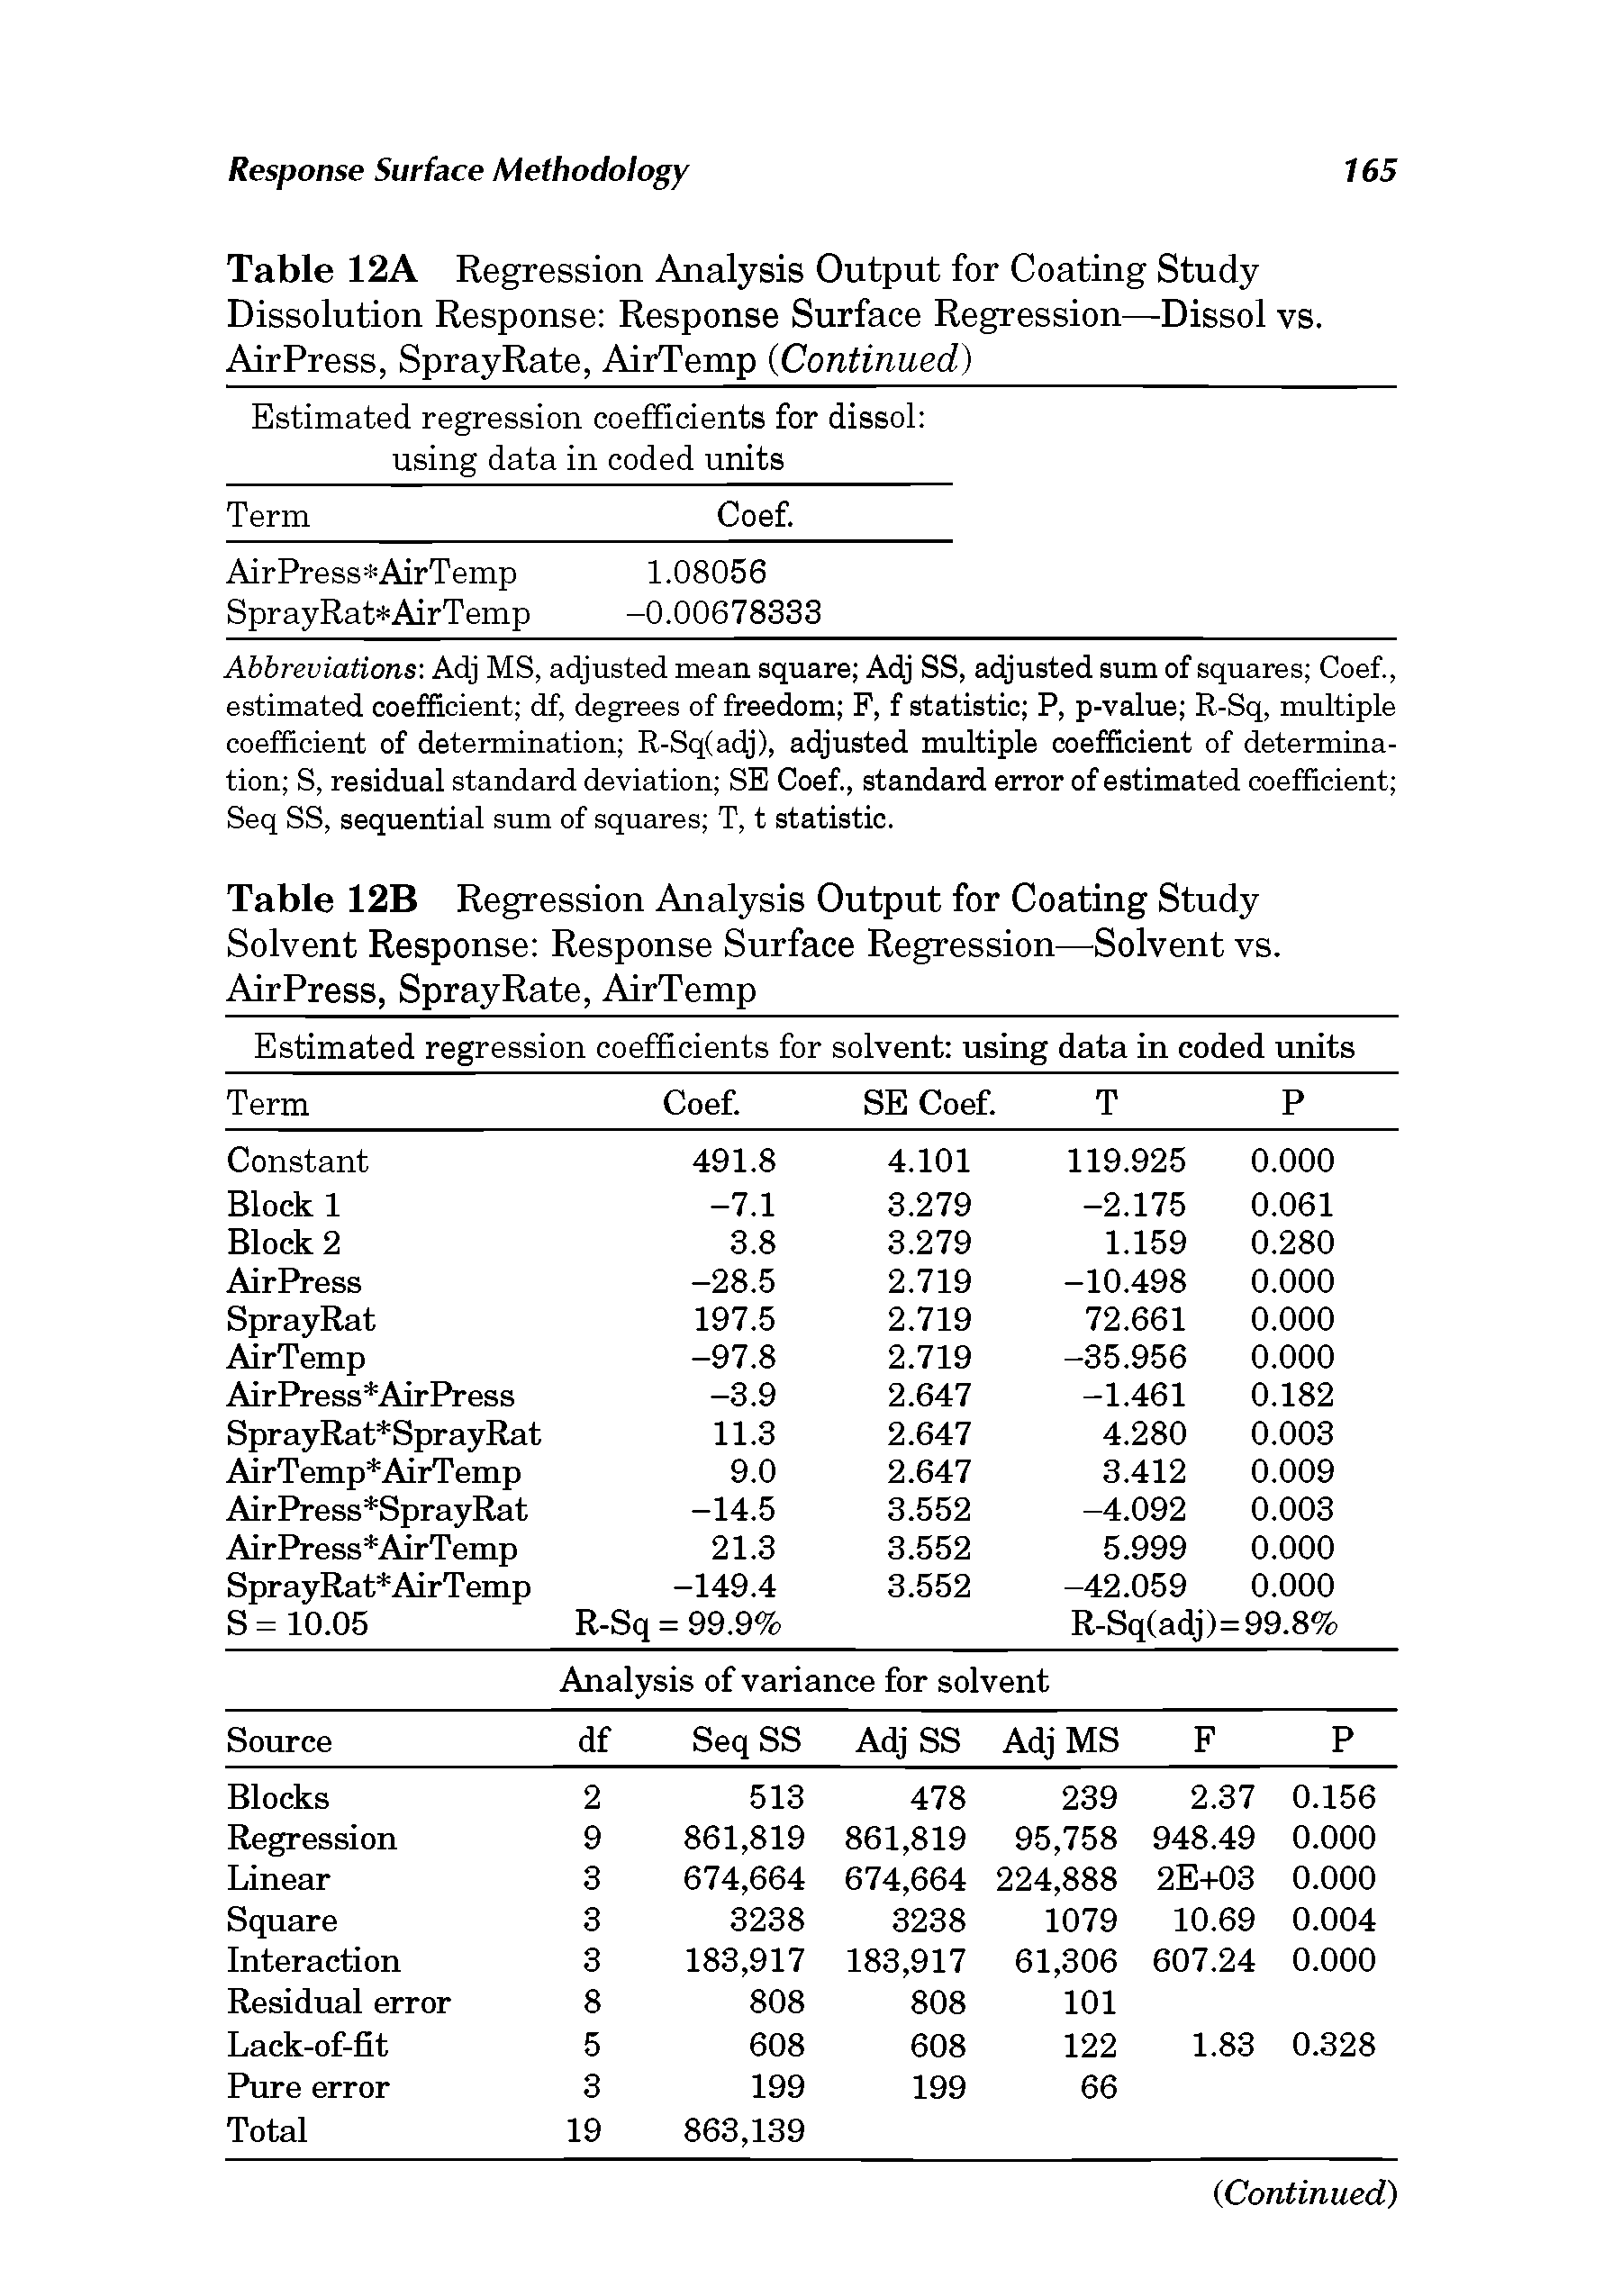 Table 12B Regression Analysis Output for Coating Study Solvent Response Response Surface Regression—Solvent vs. AirPress, SprayRate, AirTemp...